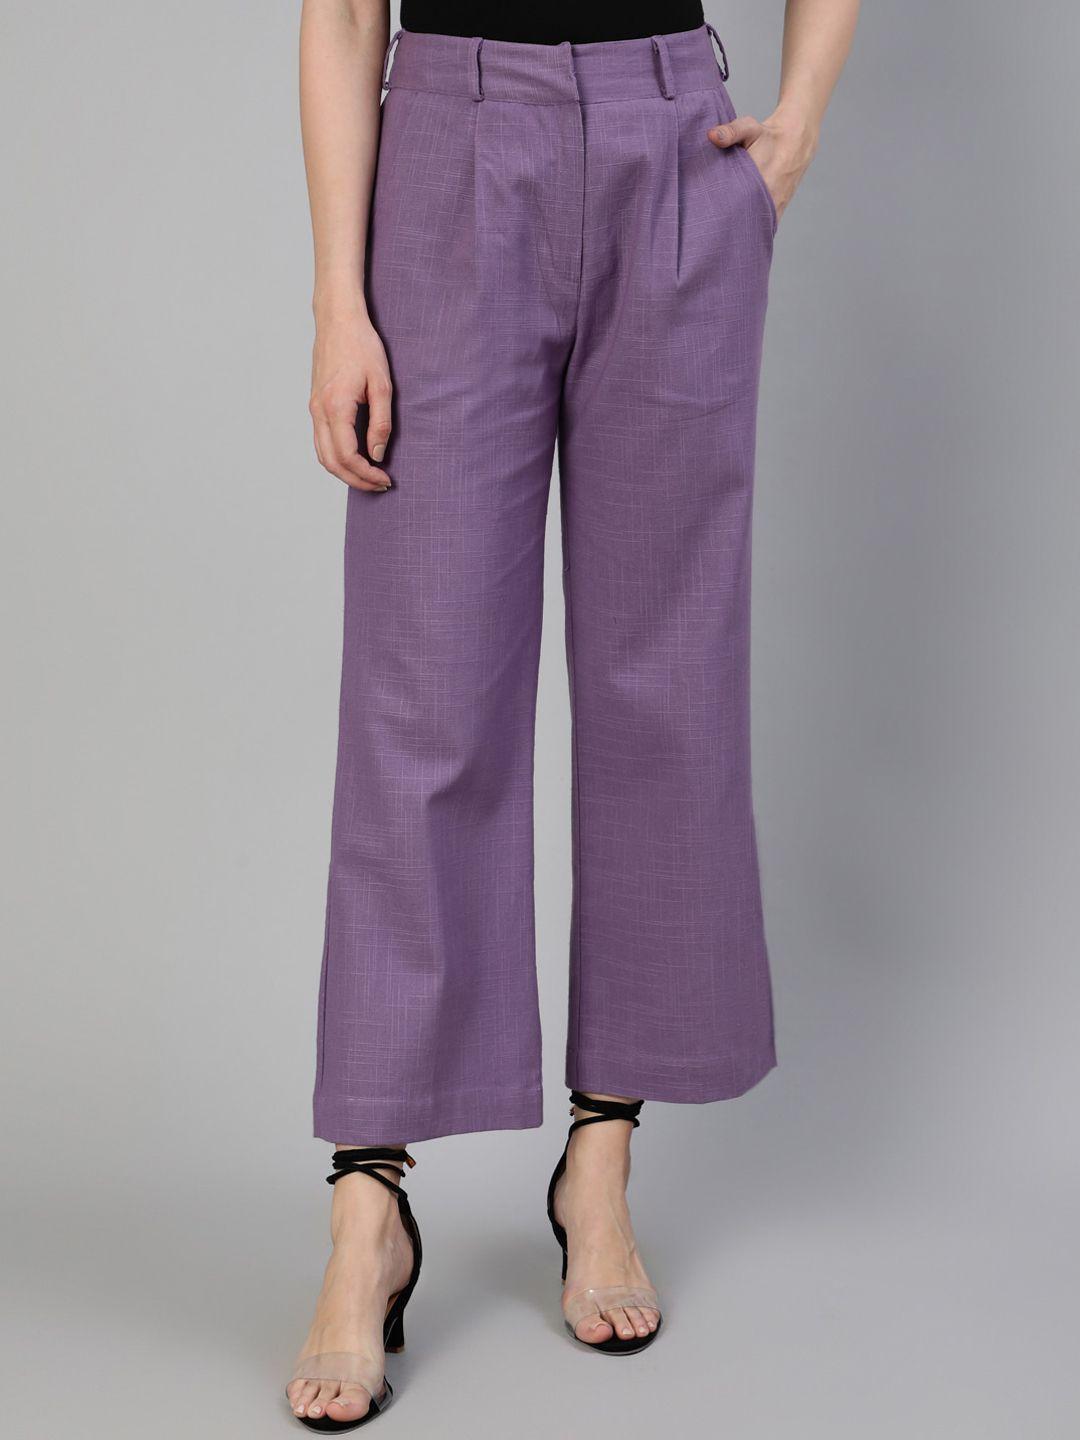 jaipur-kurti-women-lavender-solid-flared-high-rise-pleated-cotton-parallel-trousers